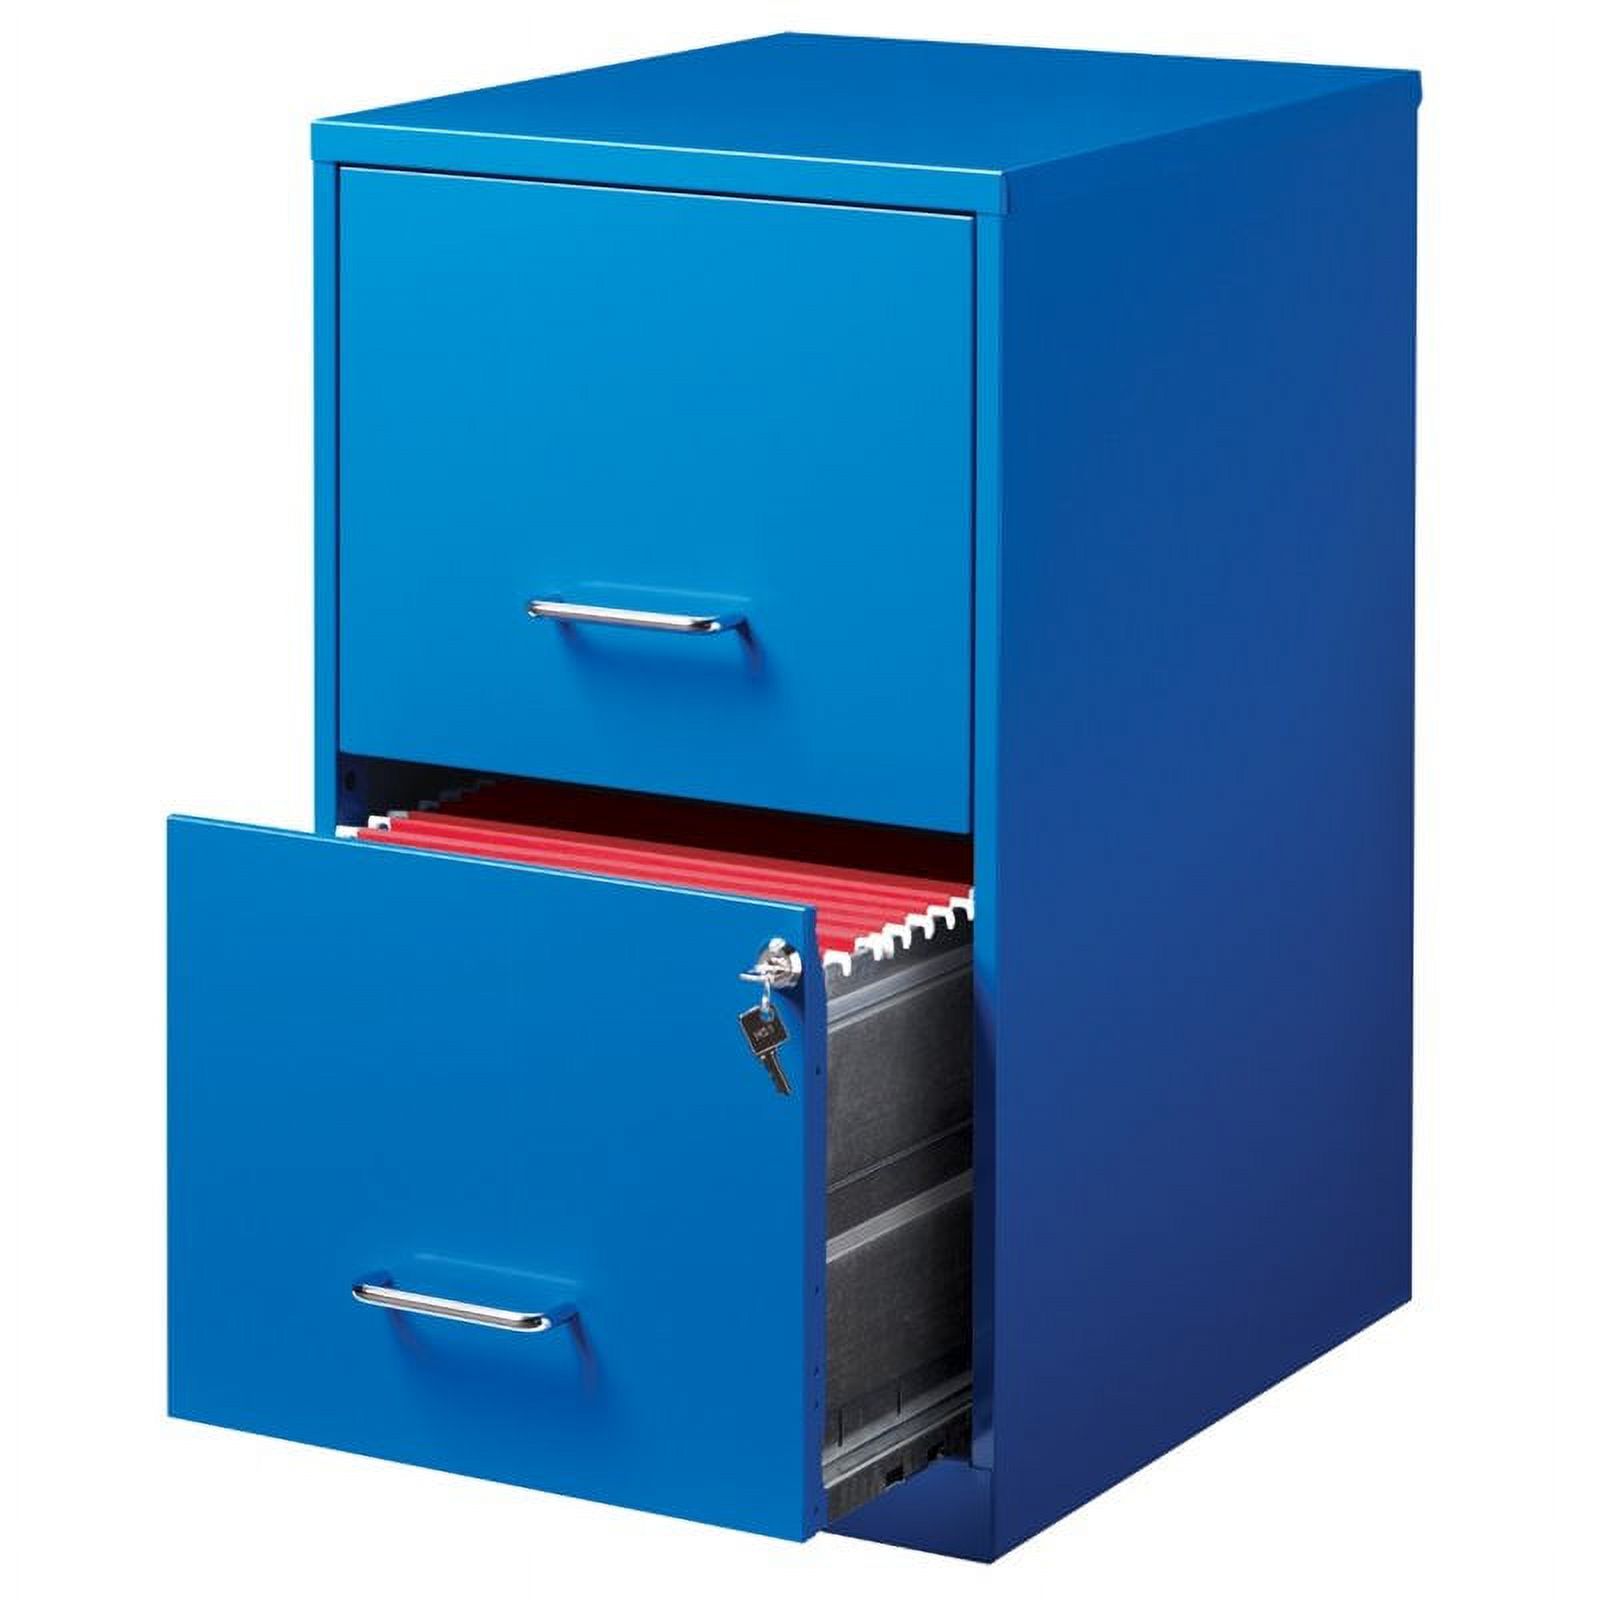 2 Piece Value Pack 4 and 2 Drawer Filing Cabinet in Putty and Blue - image 3 of 3